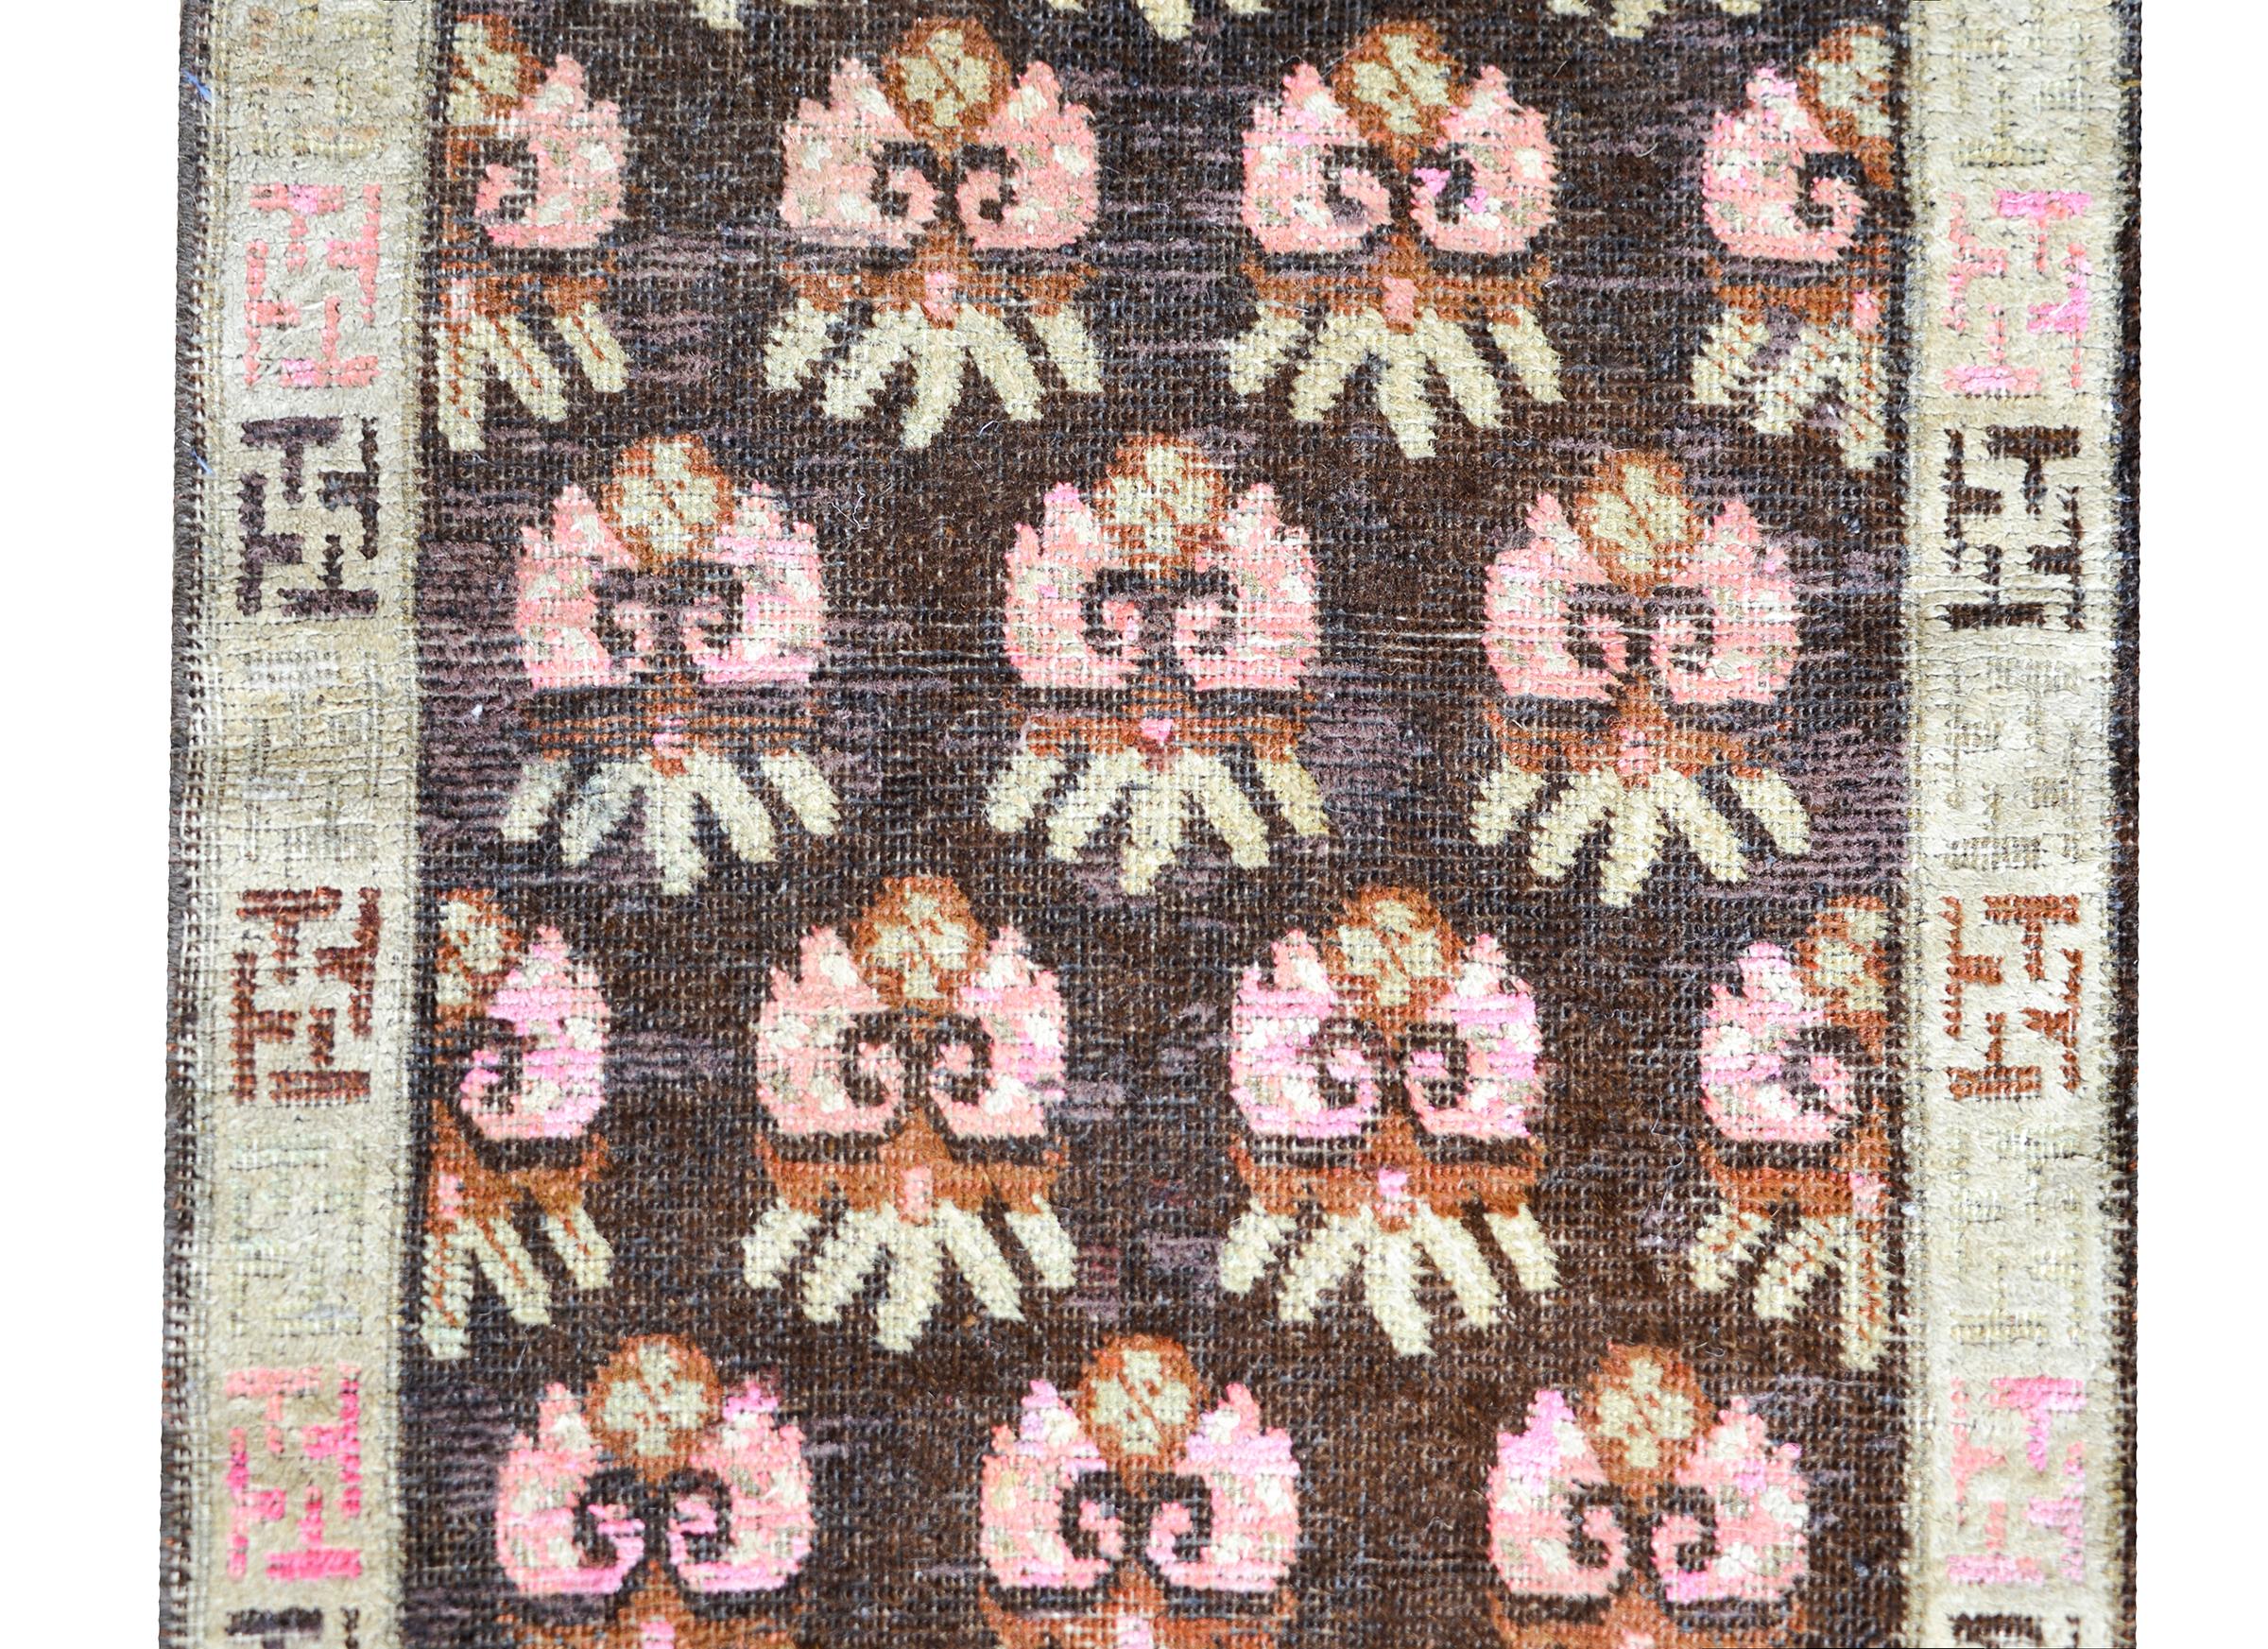 A wonderful early 20th century Central Asian Samarkand rug with an all-over stylized floral pattern woven in pink and gold and set against a dark brown background. The border is simple with a stylized meandering motif pattern.